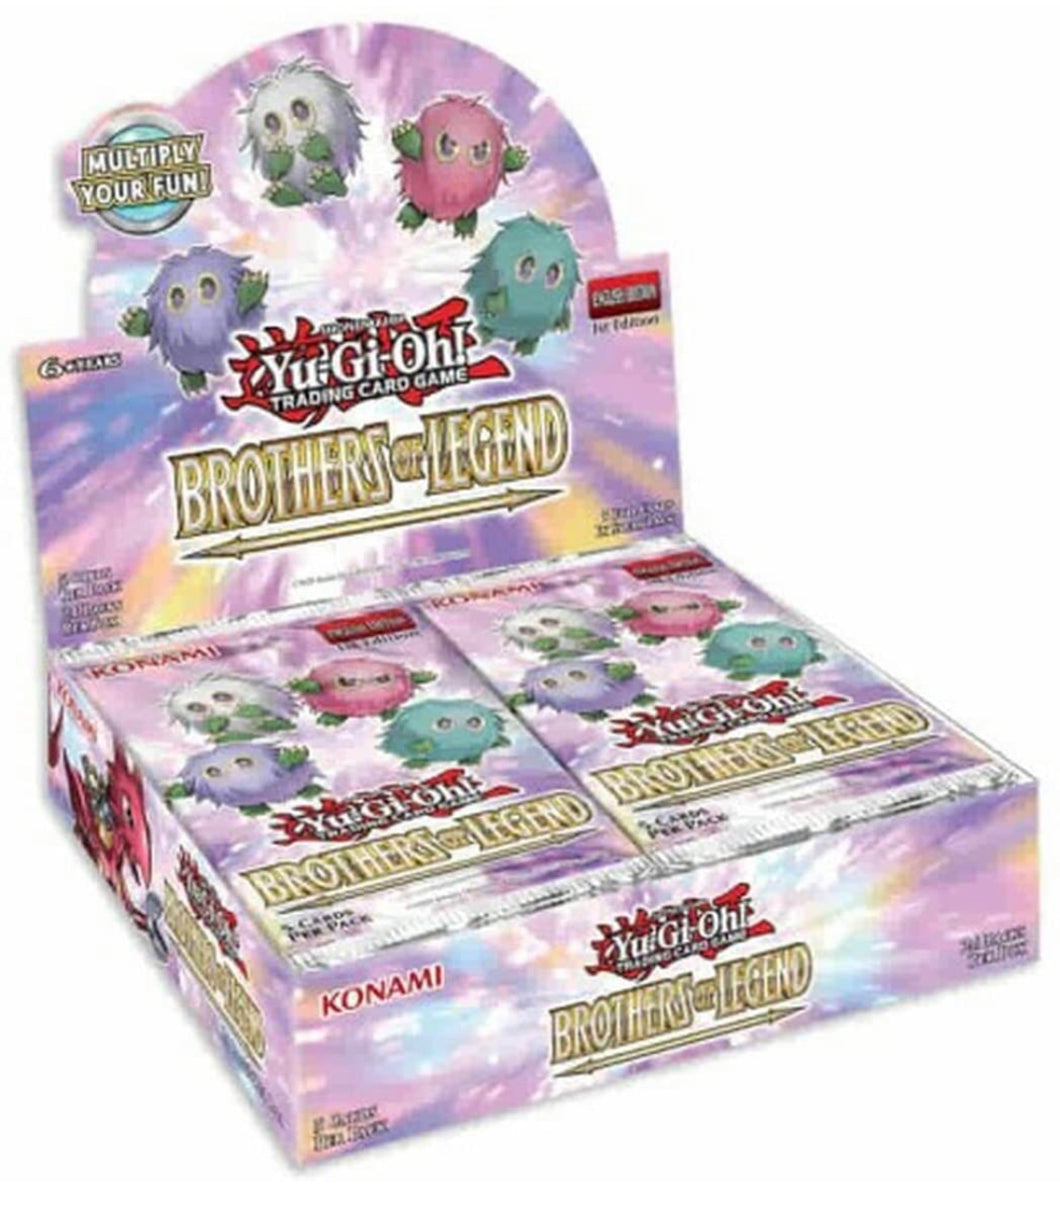 Brothers of legend booster box (24 packs)